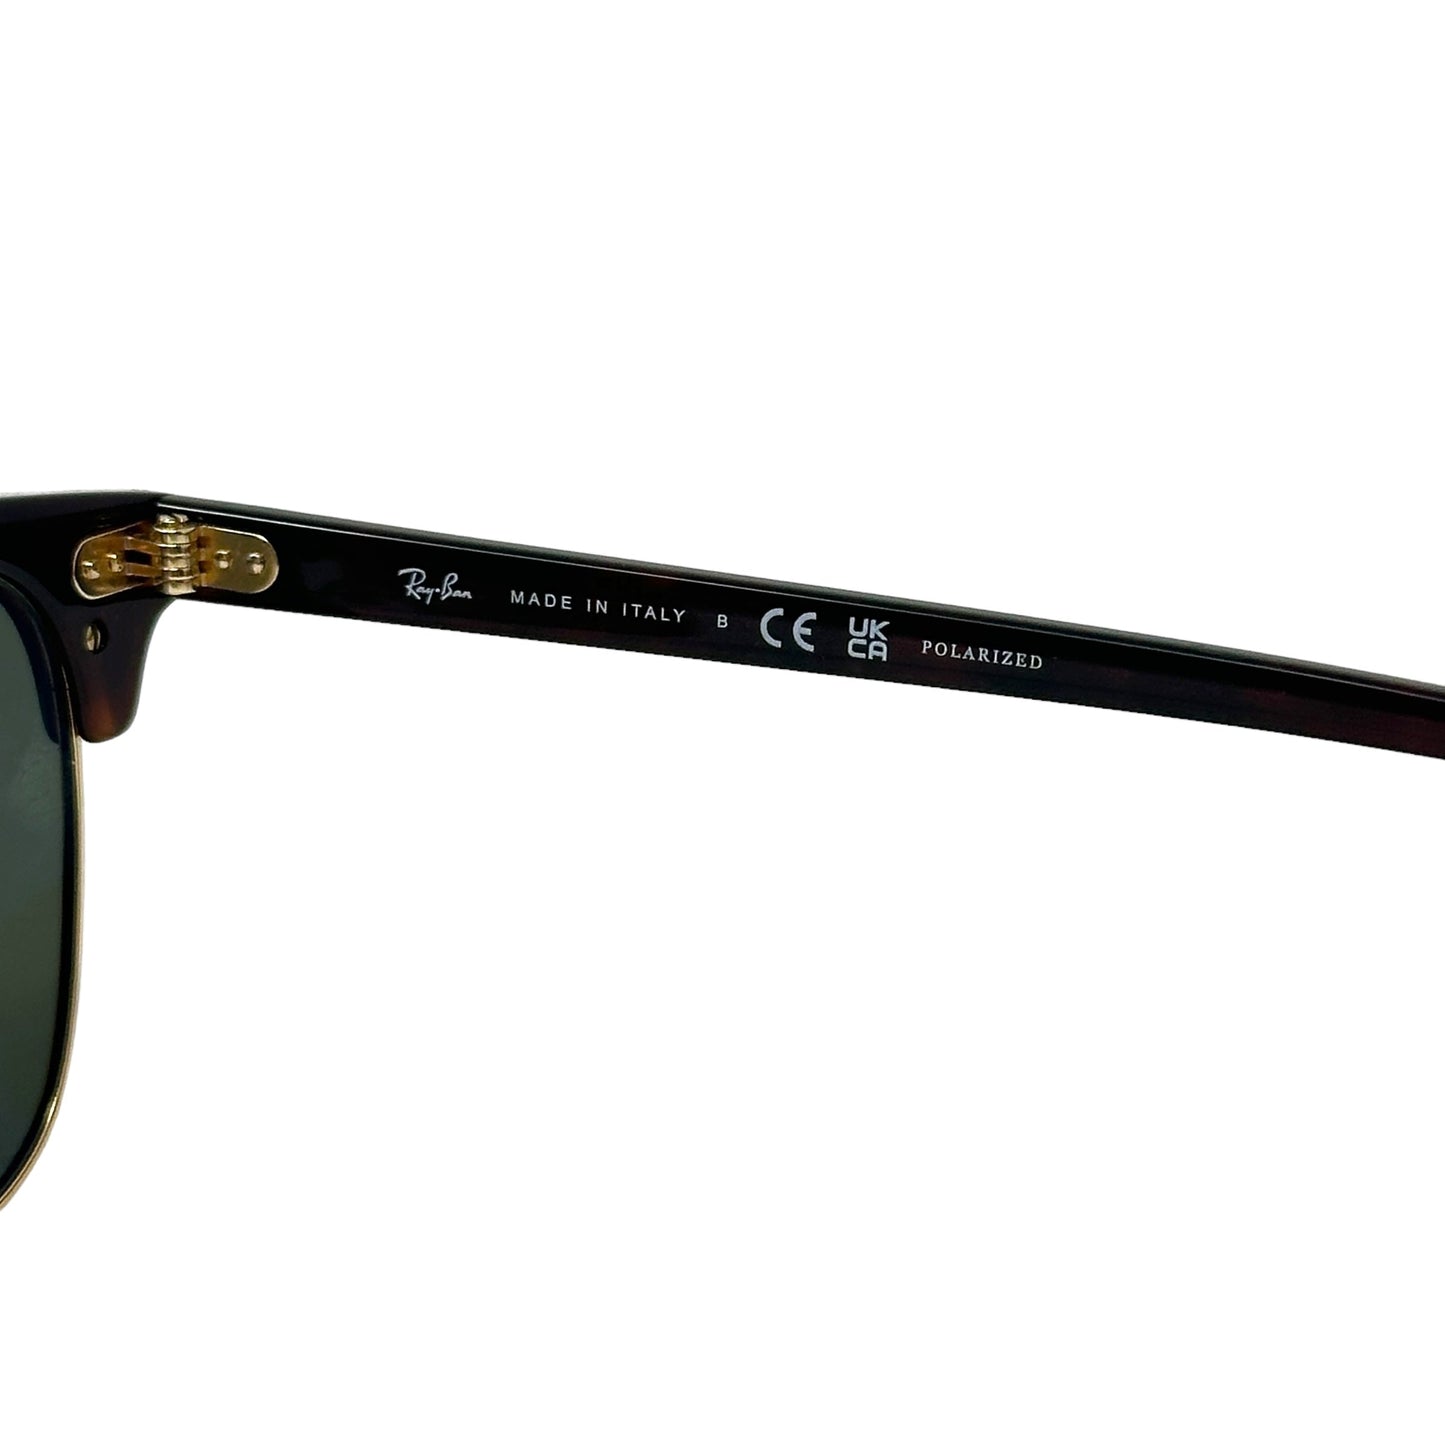 Clubmaster Sunglasses Ray Ban